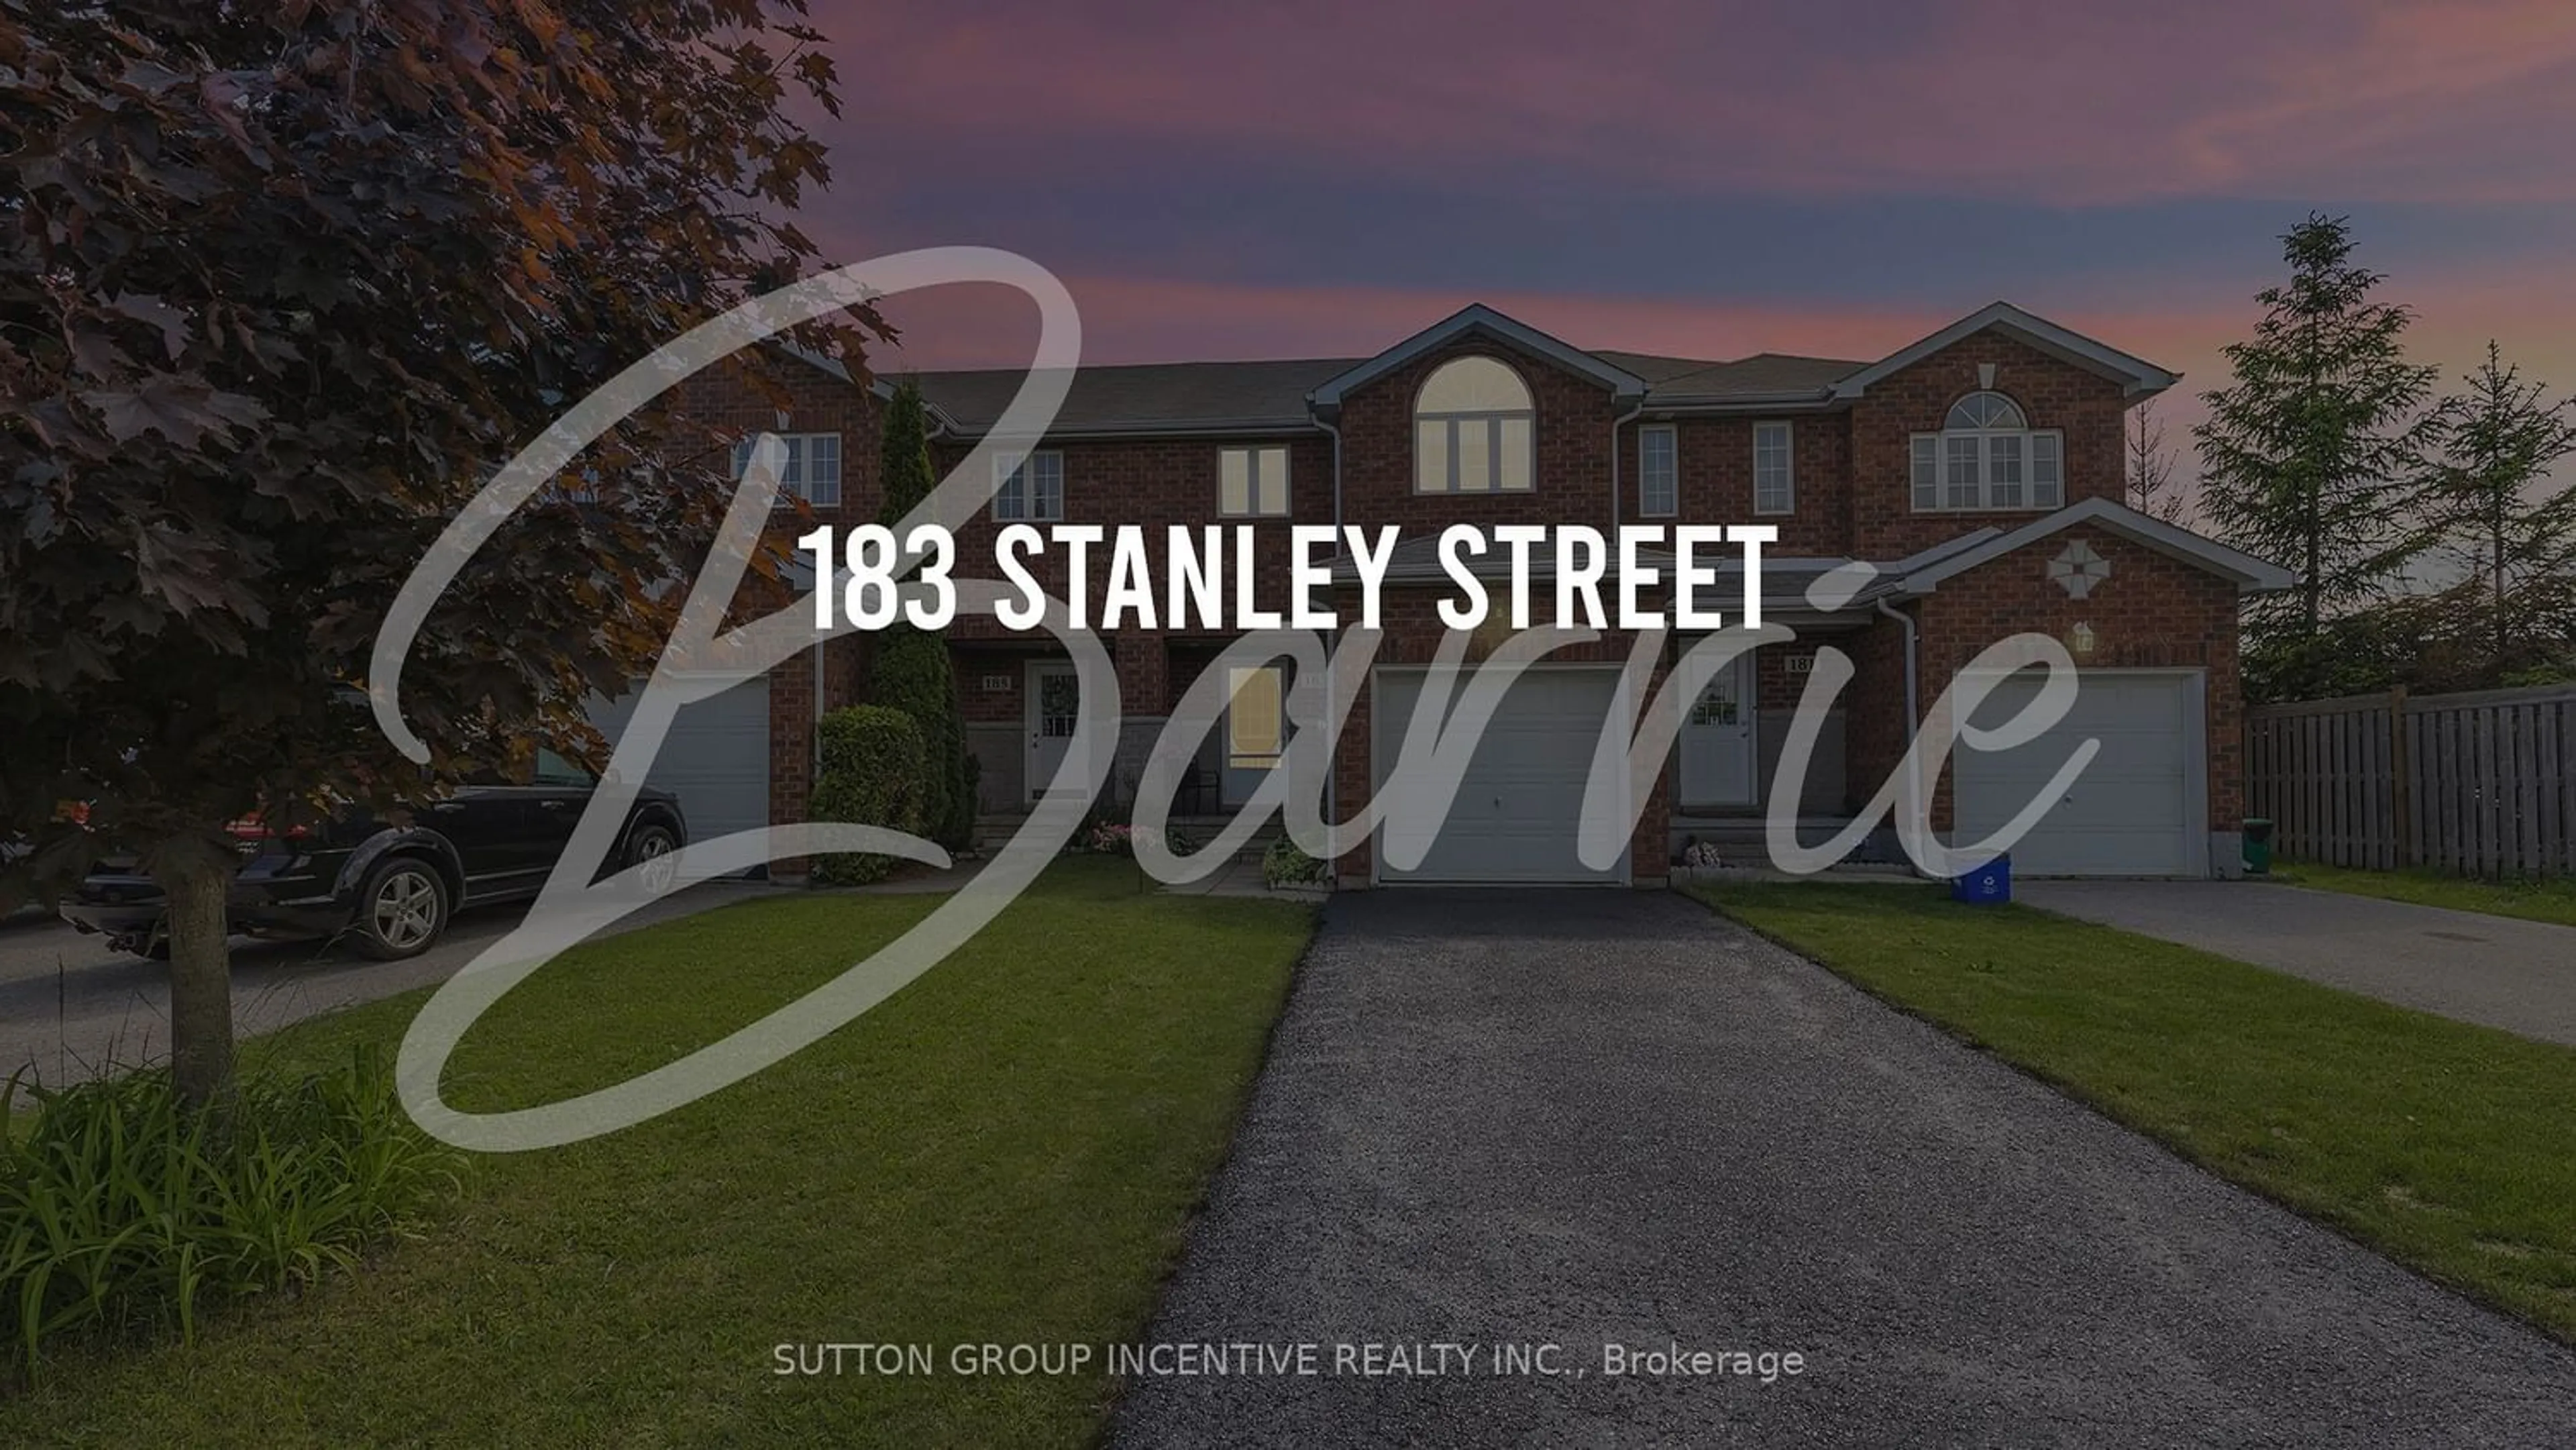 Street view for 183 Stanley St, Barrie Ontario L4M 6X9